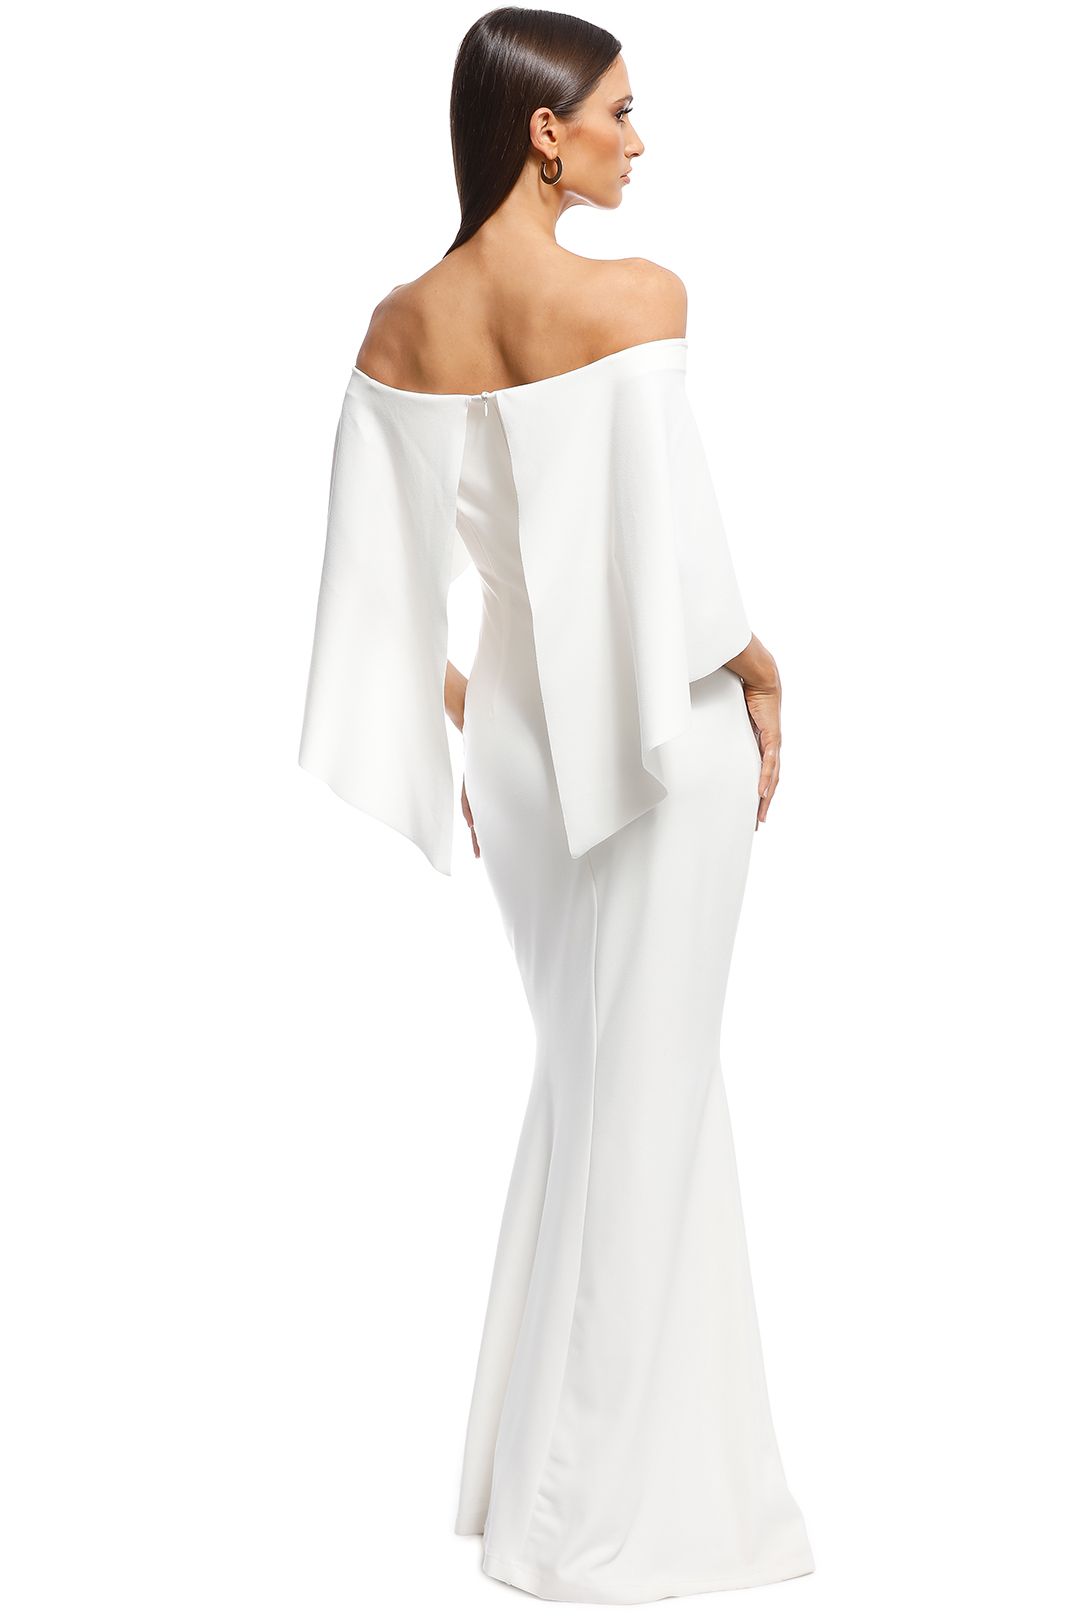 Pasduchas - Composure Gown - Ivory - Back